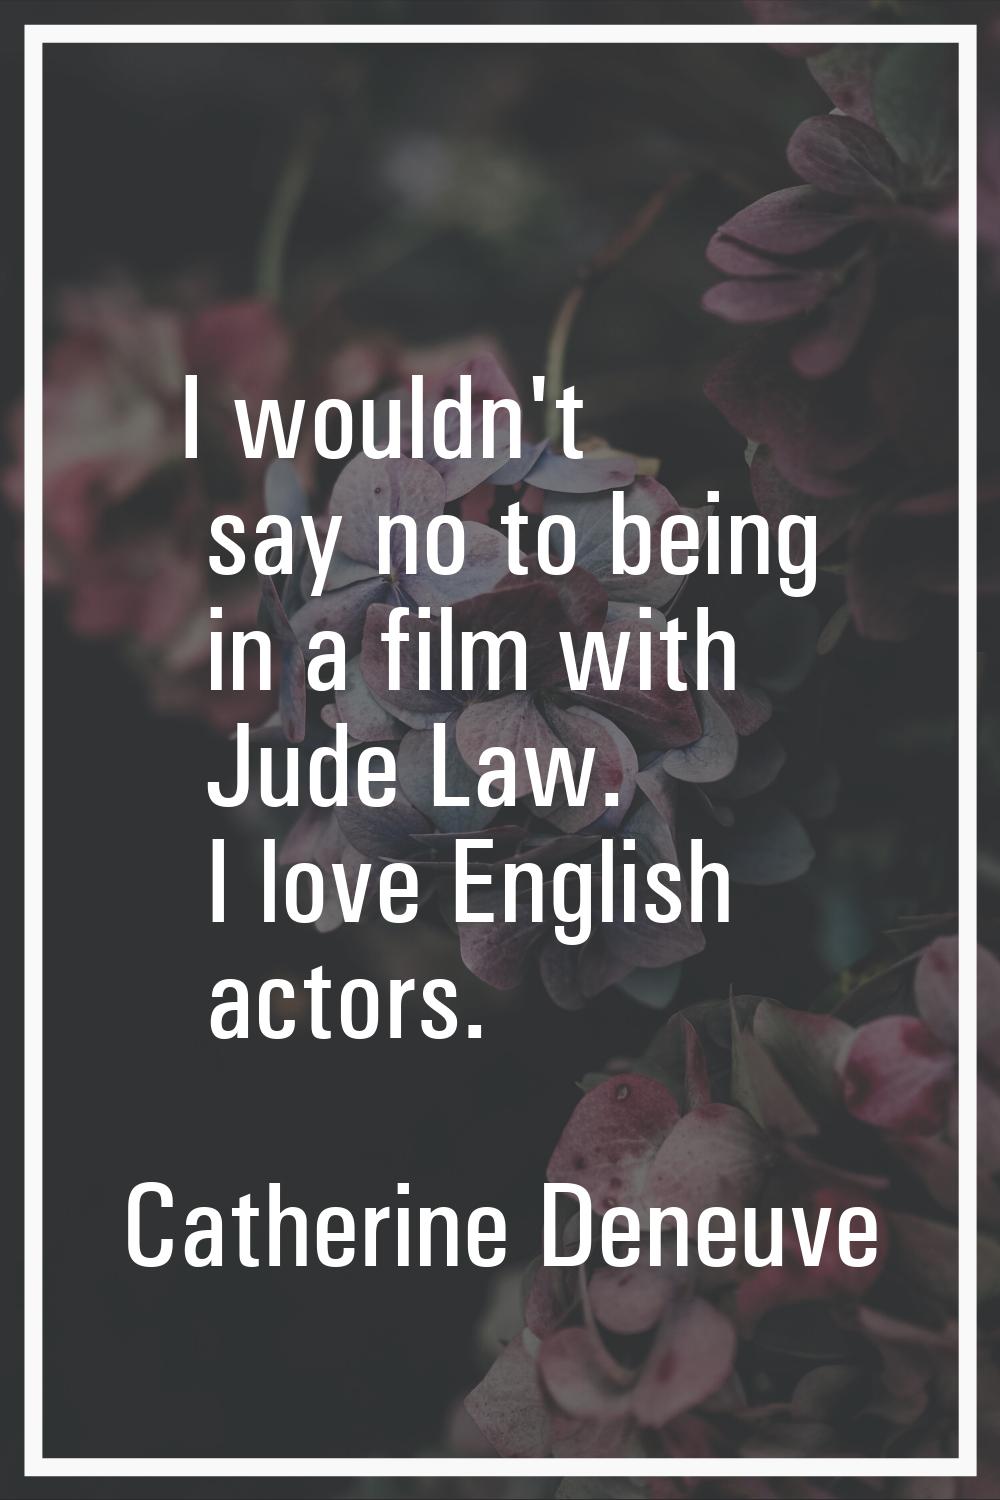 I wouldn't say no to being in a film with Jude Law. I love English actors.